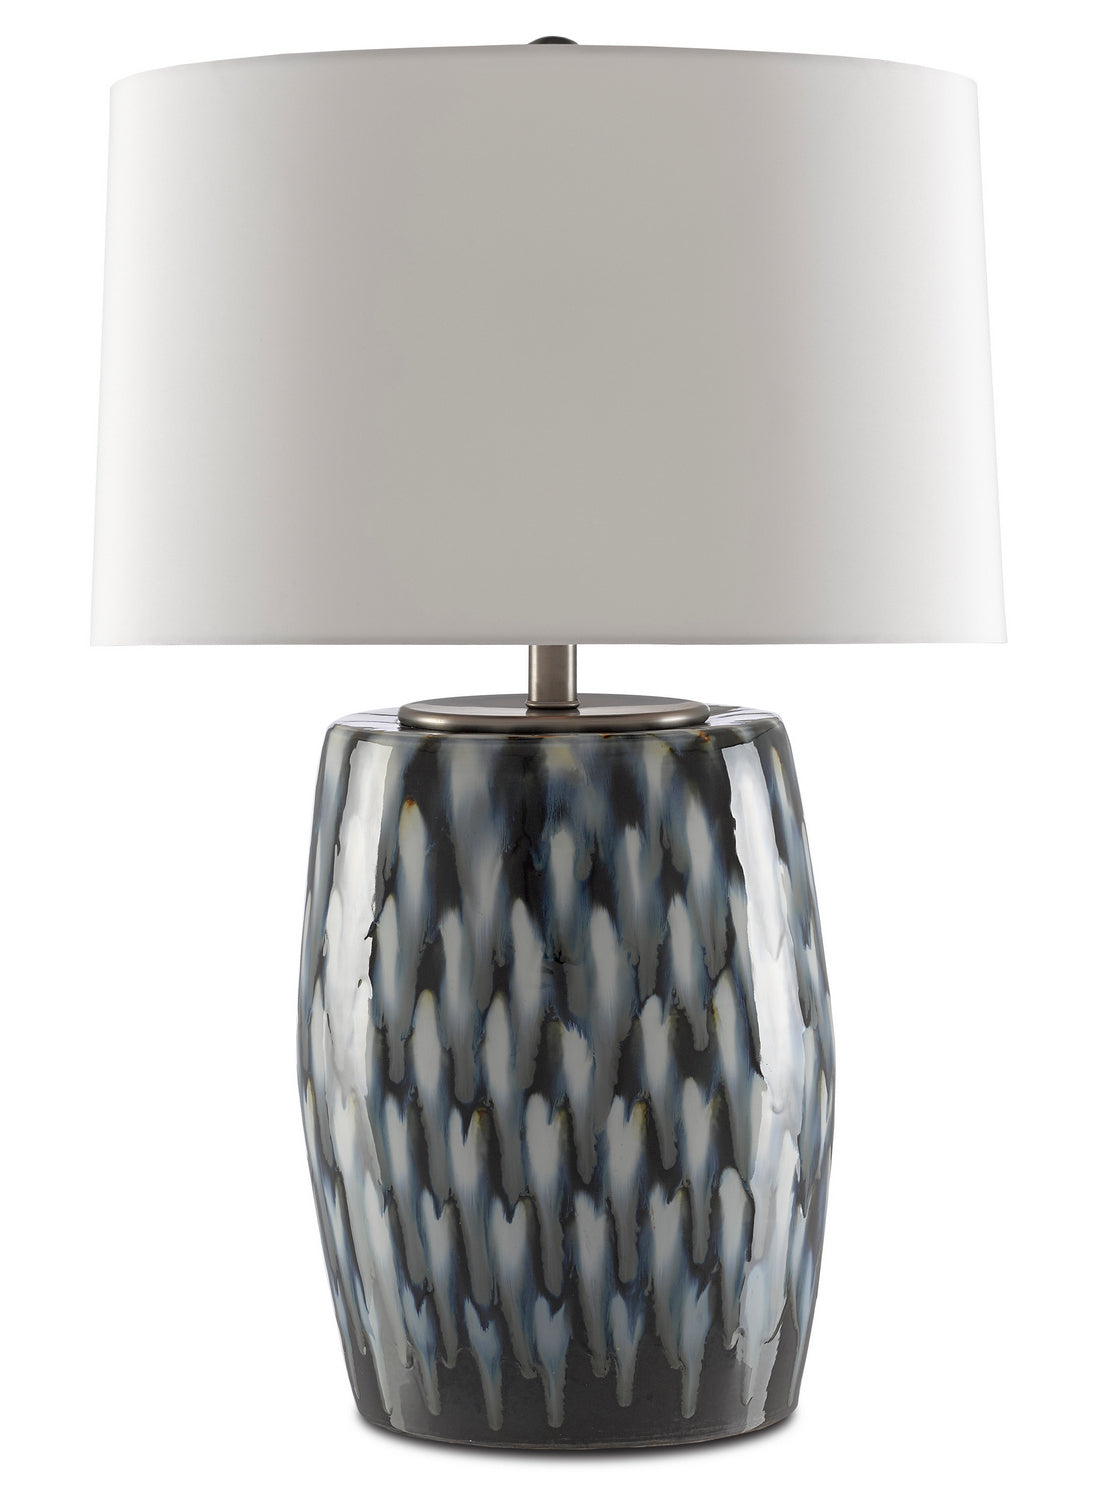 One Light Table Lamp from the Milner collection in Indigo/Cloud finish